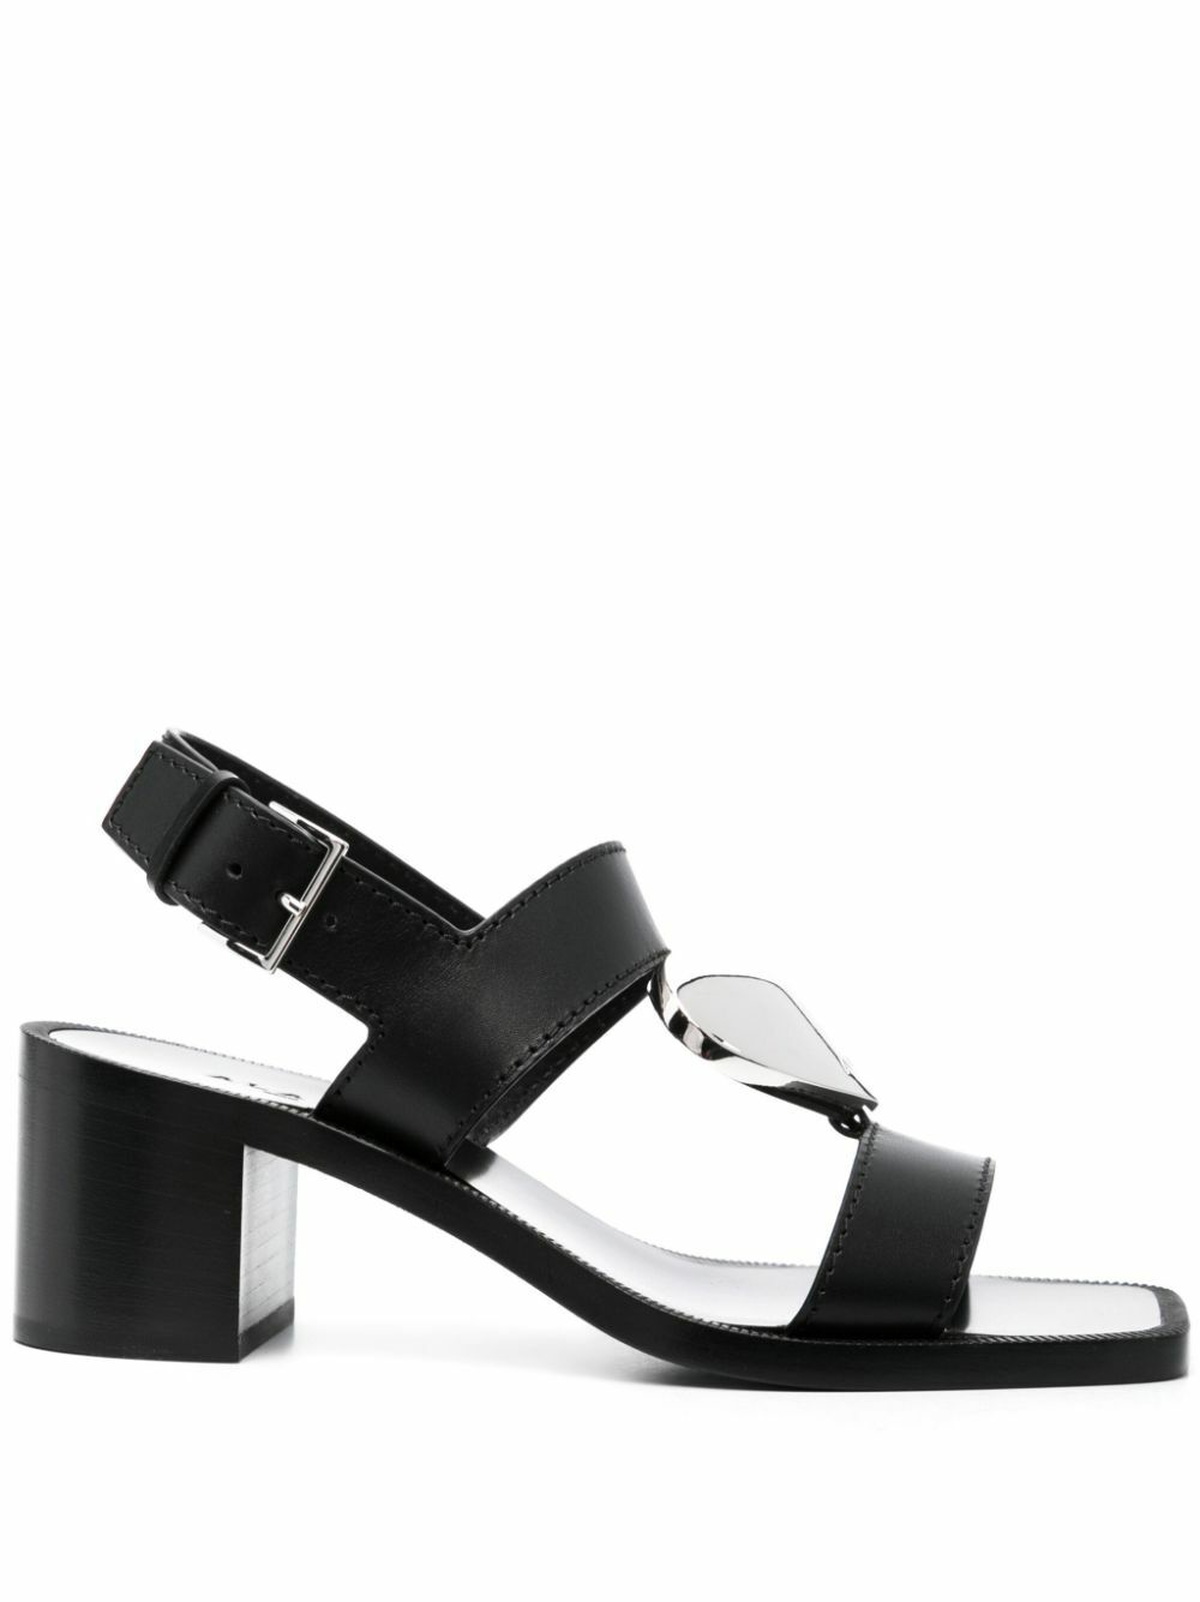 Coeur Patent Leather And PU Mules in Black - Alaia